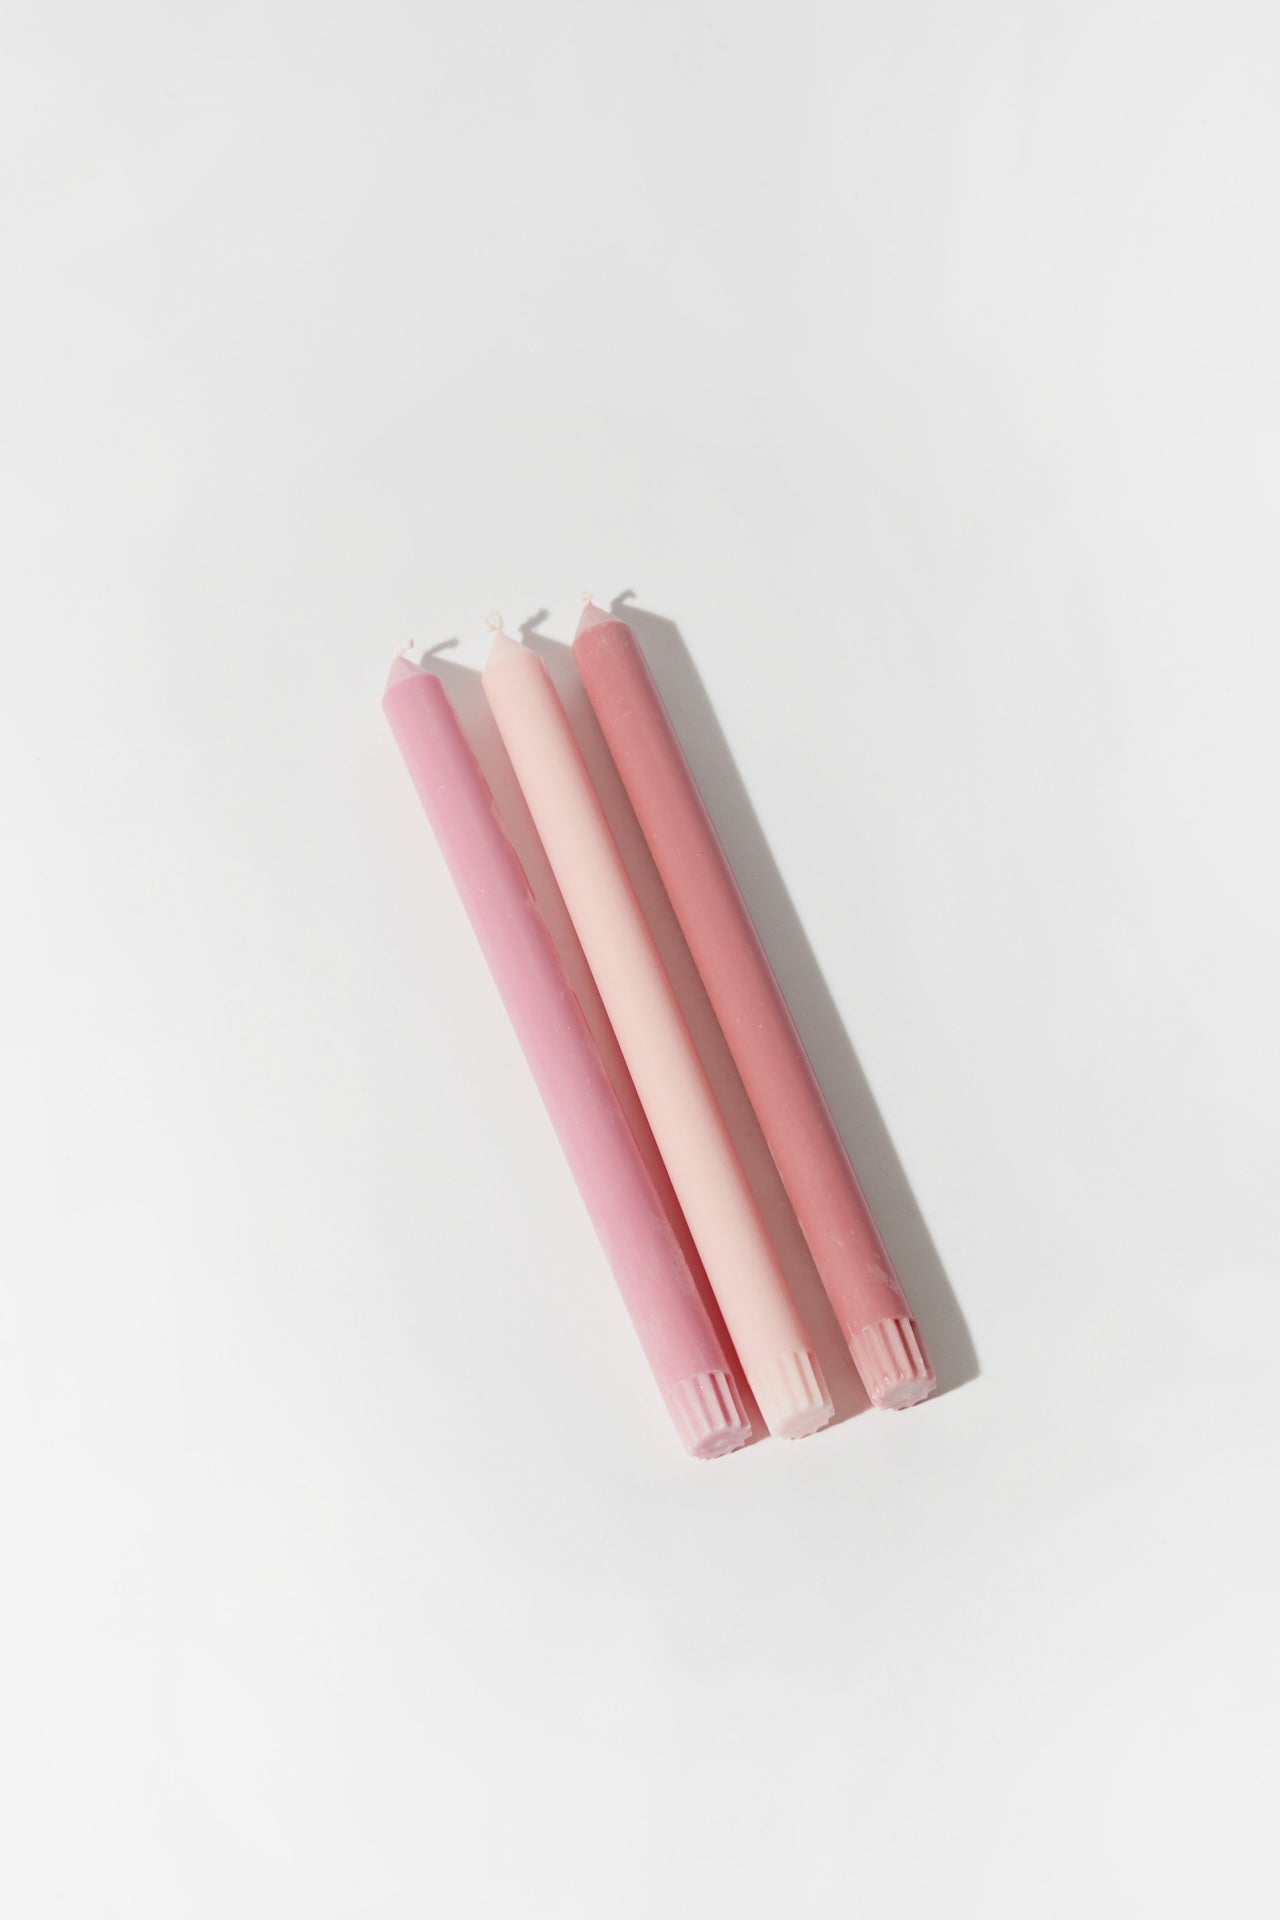 Taper Candle Set Pink